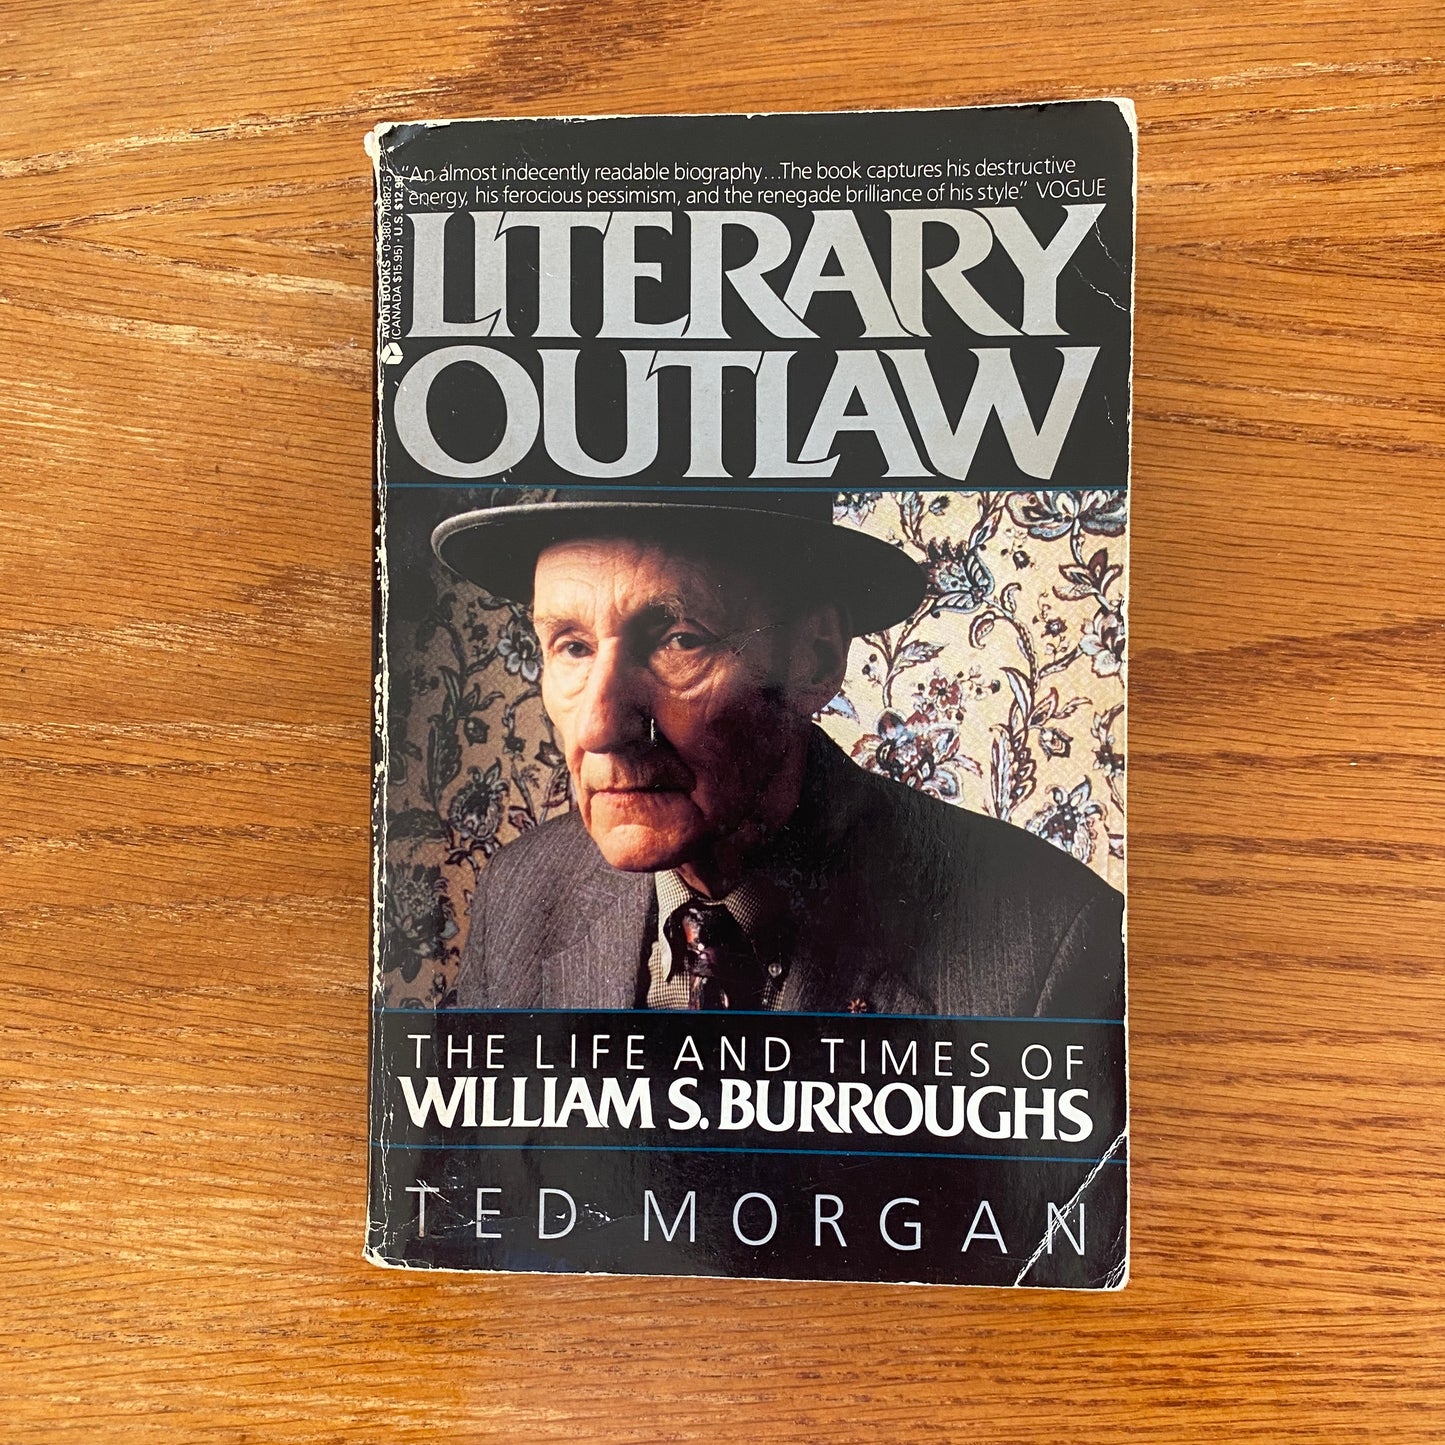 William S. Burroughs - Literary Outlaw